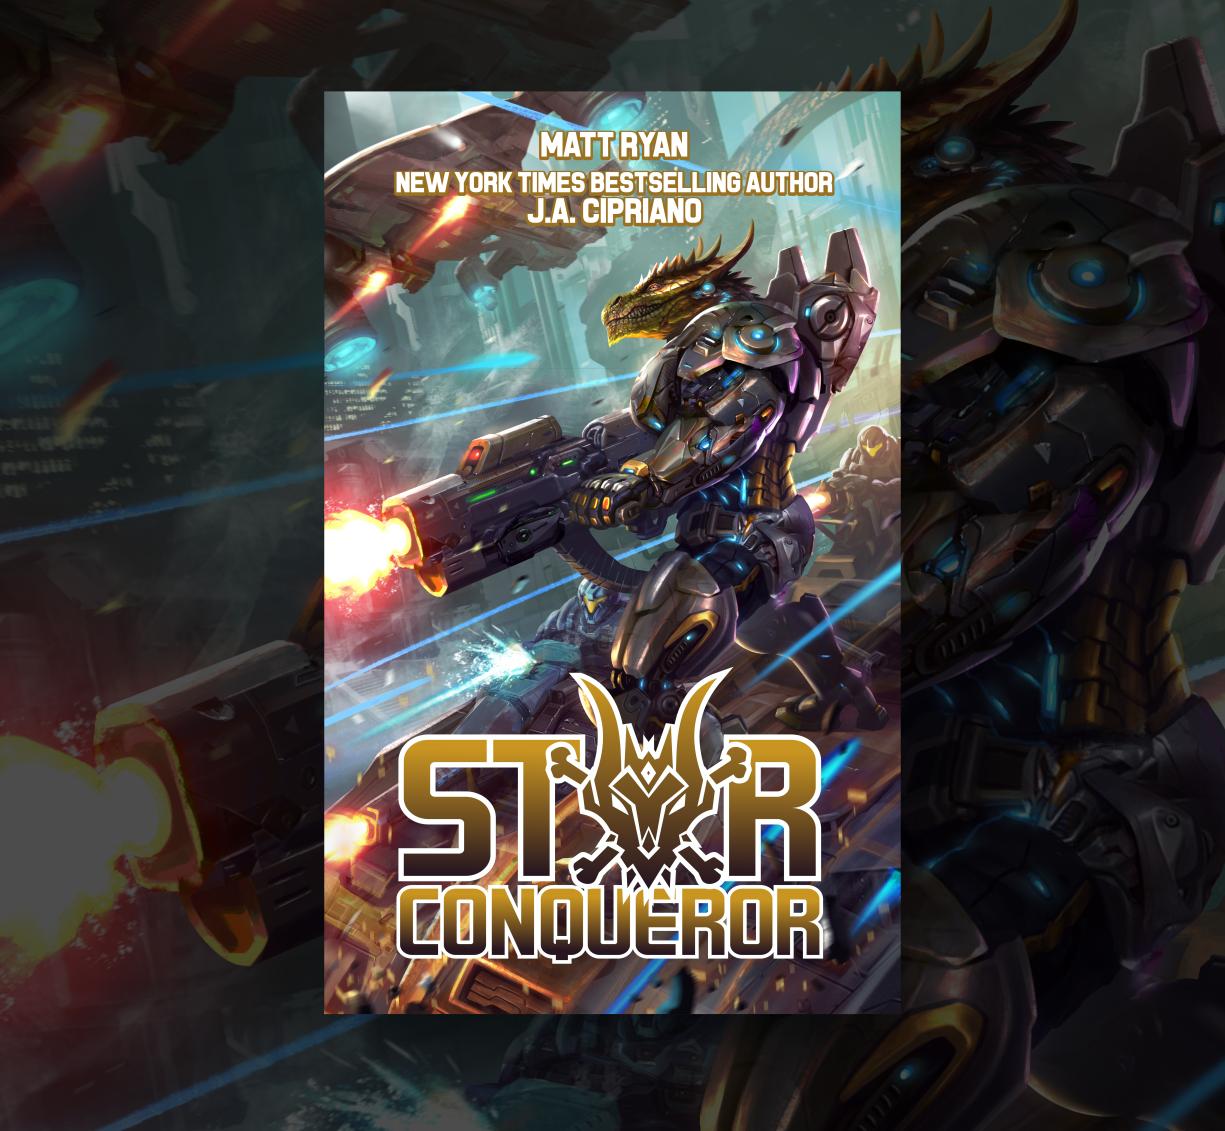 Book cover design for Star Conqueror. Designed by Johnery